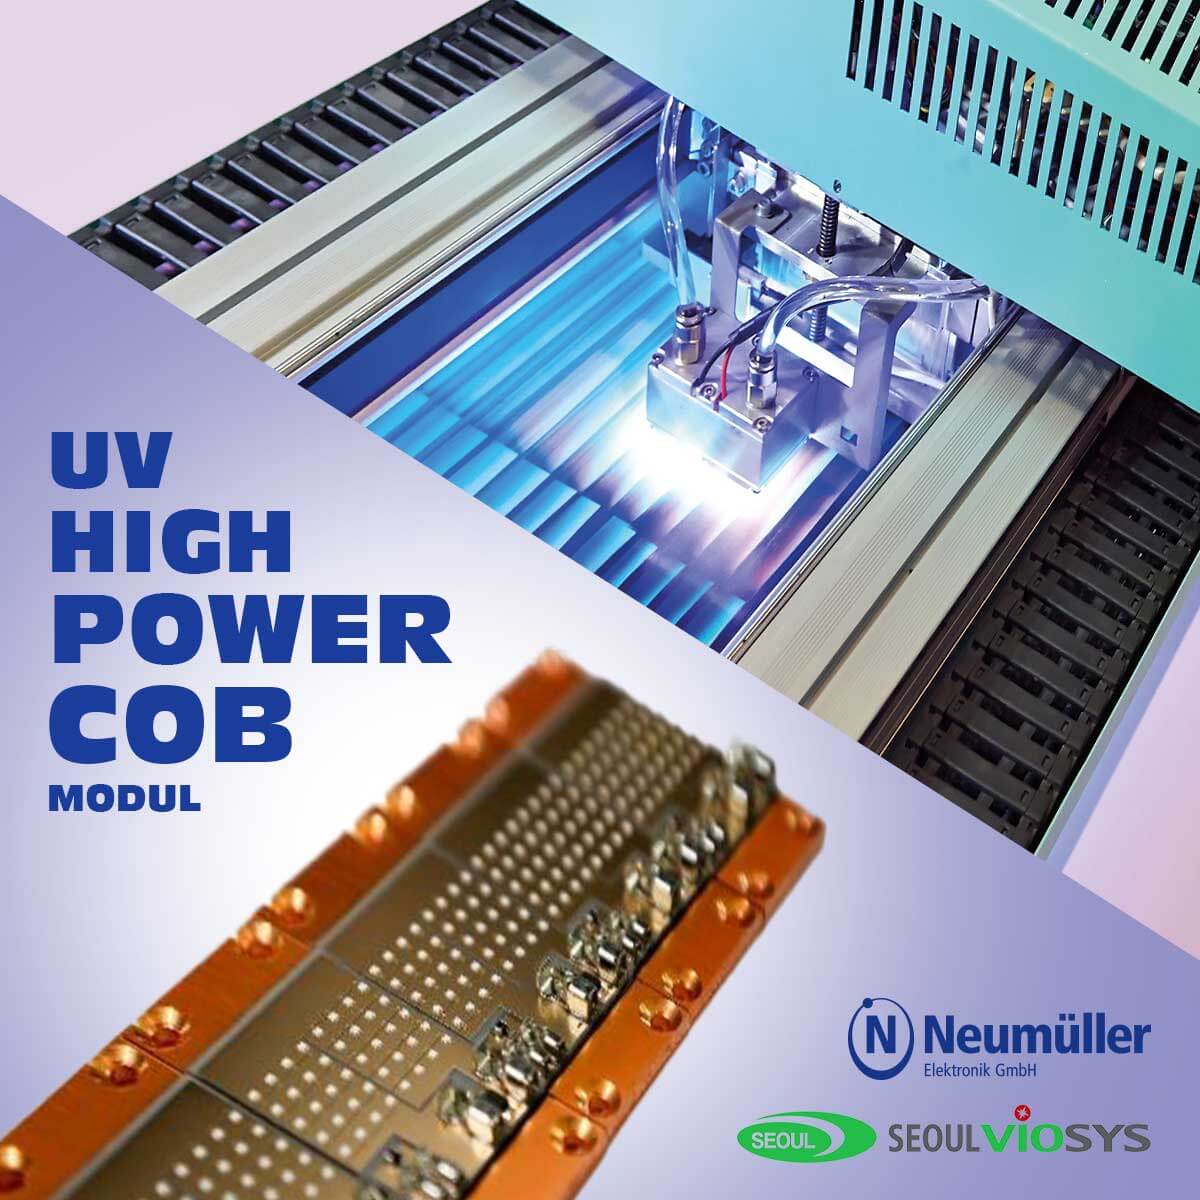 The new UV High Power COB module from Seoul Viosys